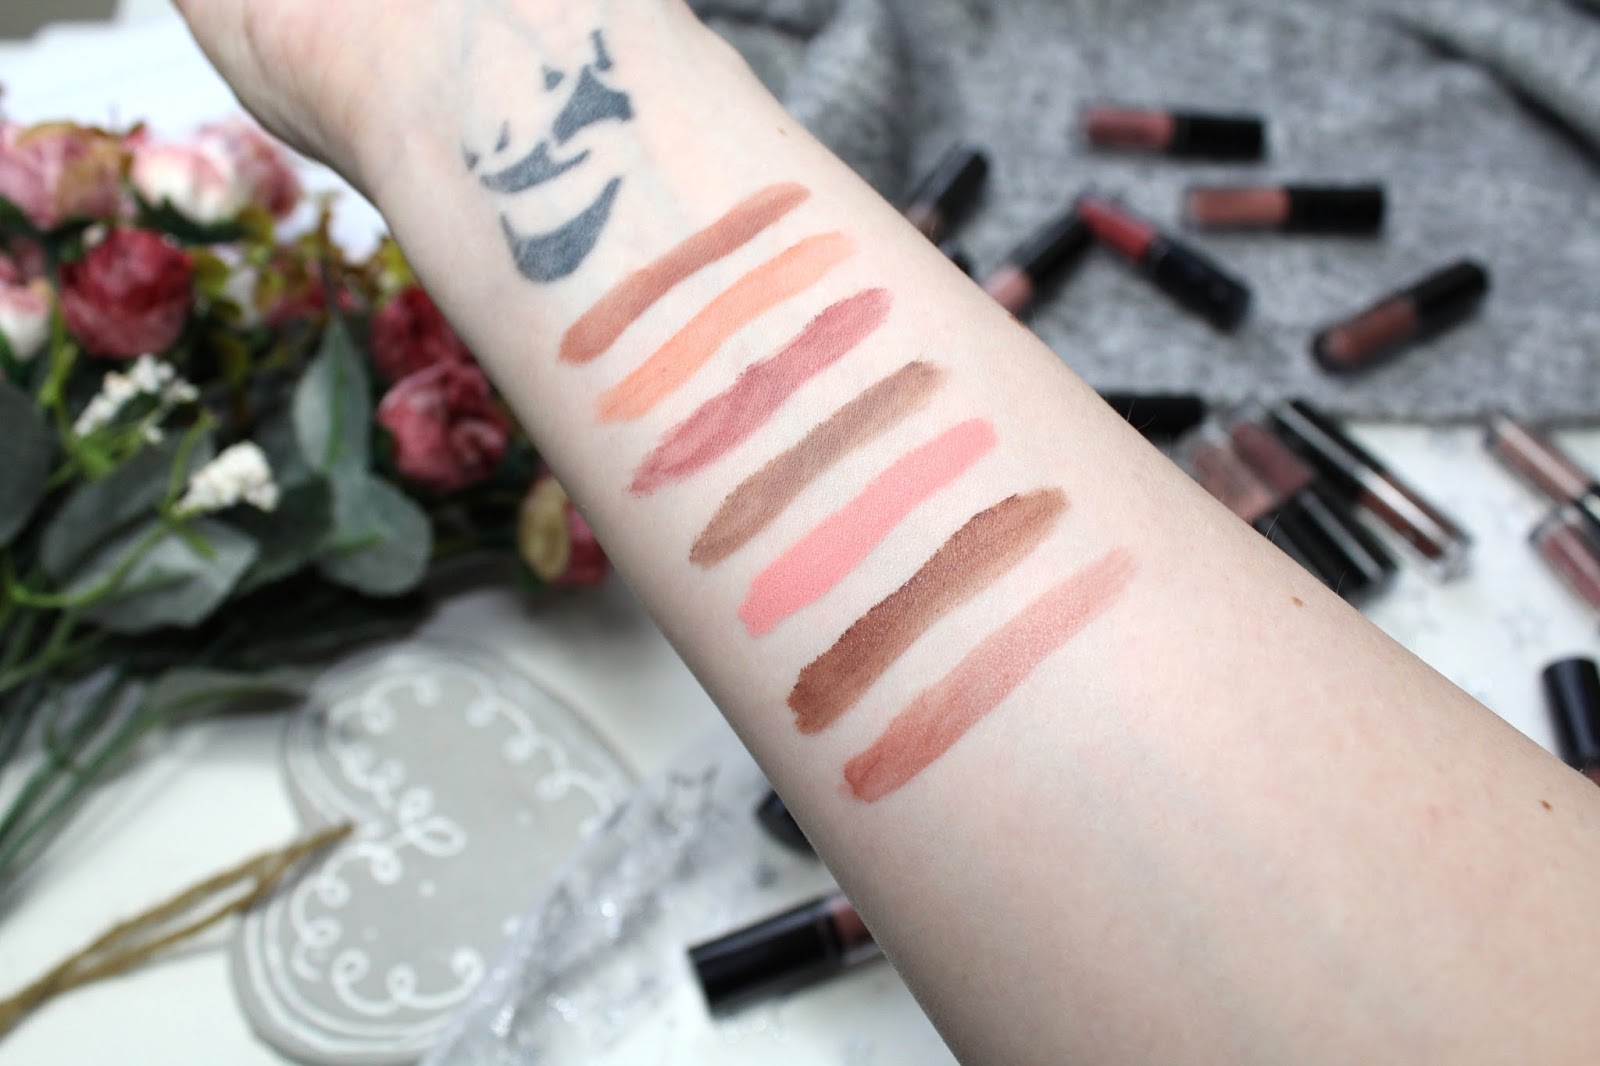 NYX PROFESSIONAL MAKEUP Lingerie Vault  issybellefox review